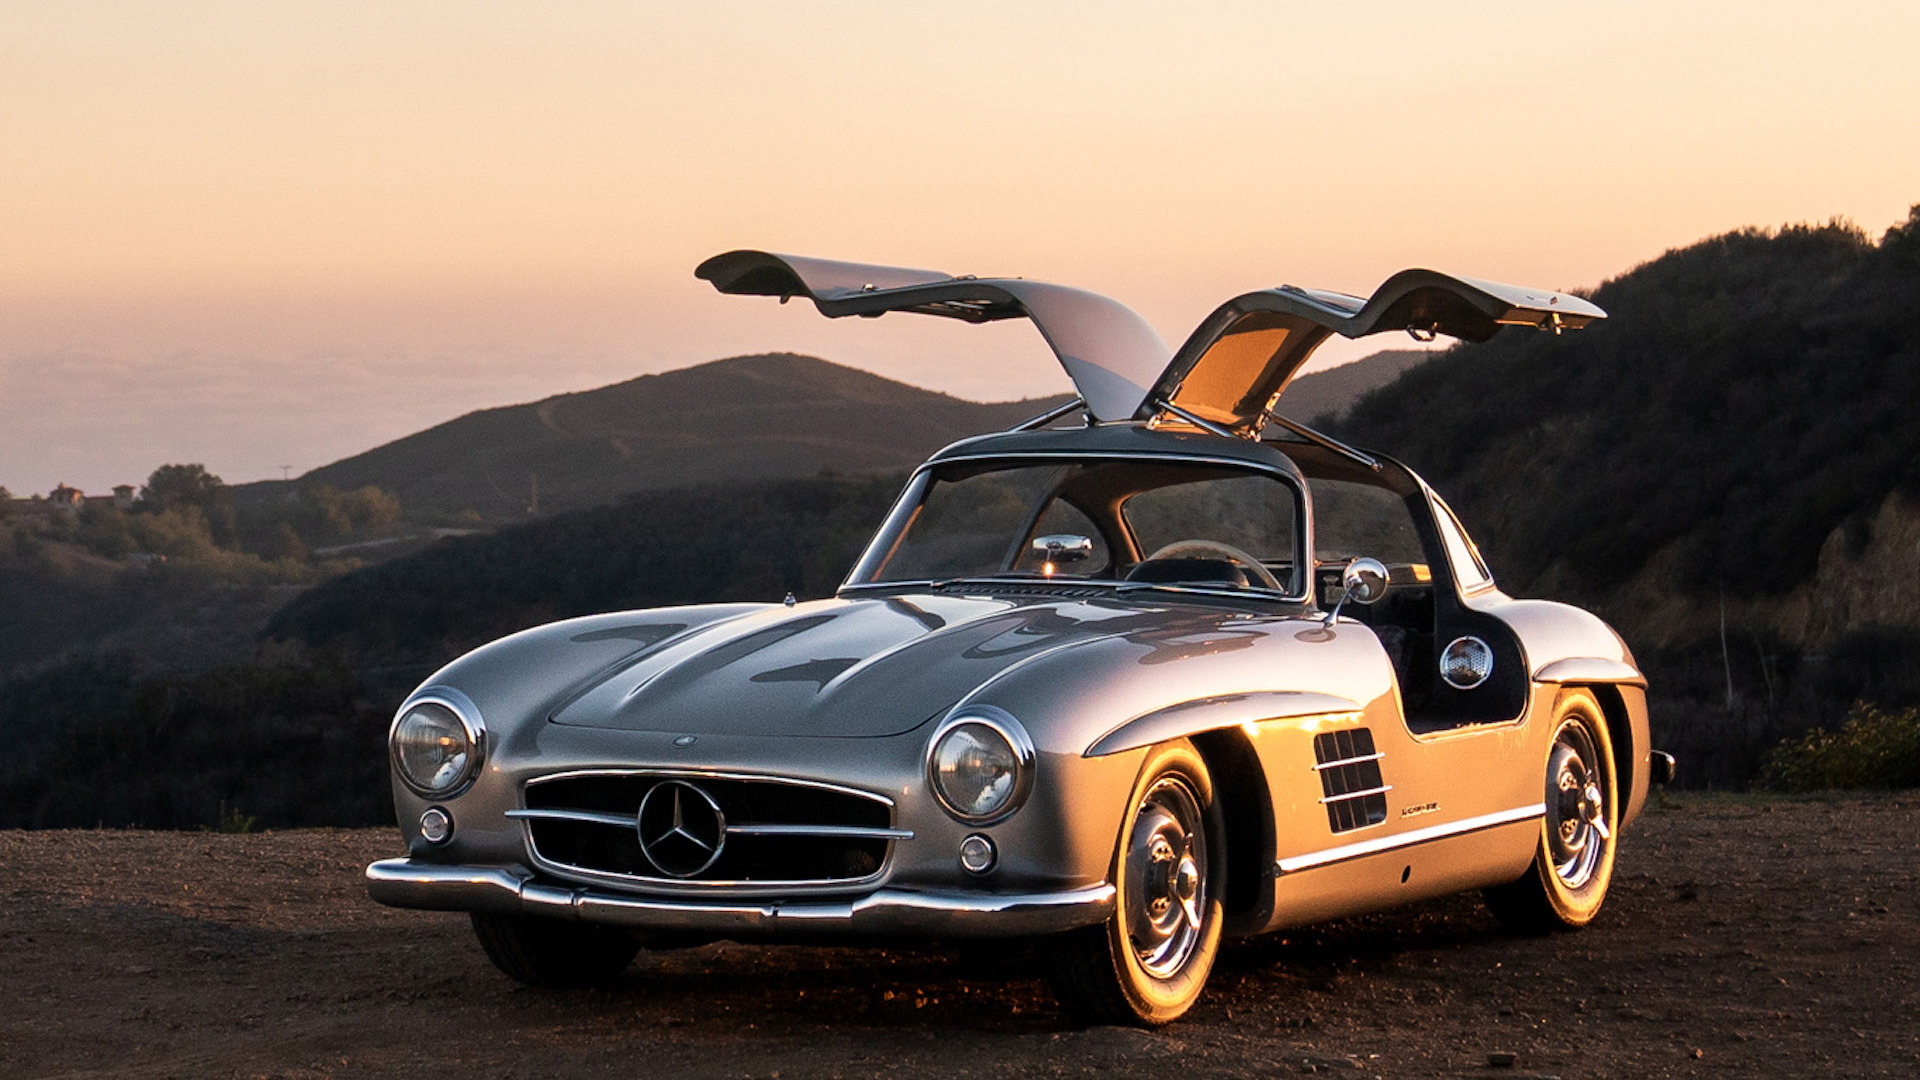 1955 Mercedes-Benz 300 SL Alloy Gullwing - Photo credit: RM Sotheby's